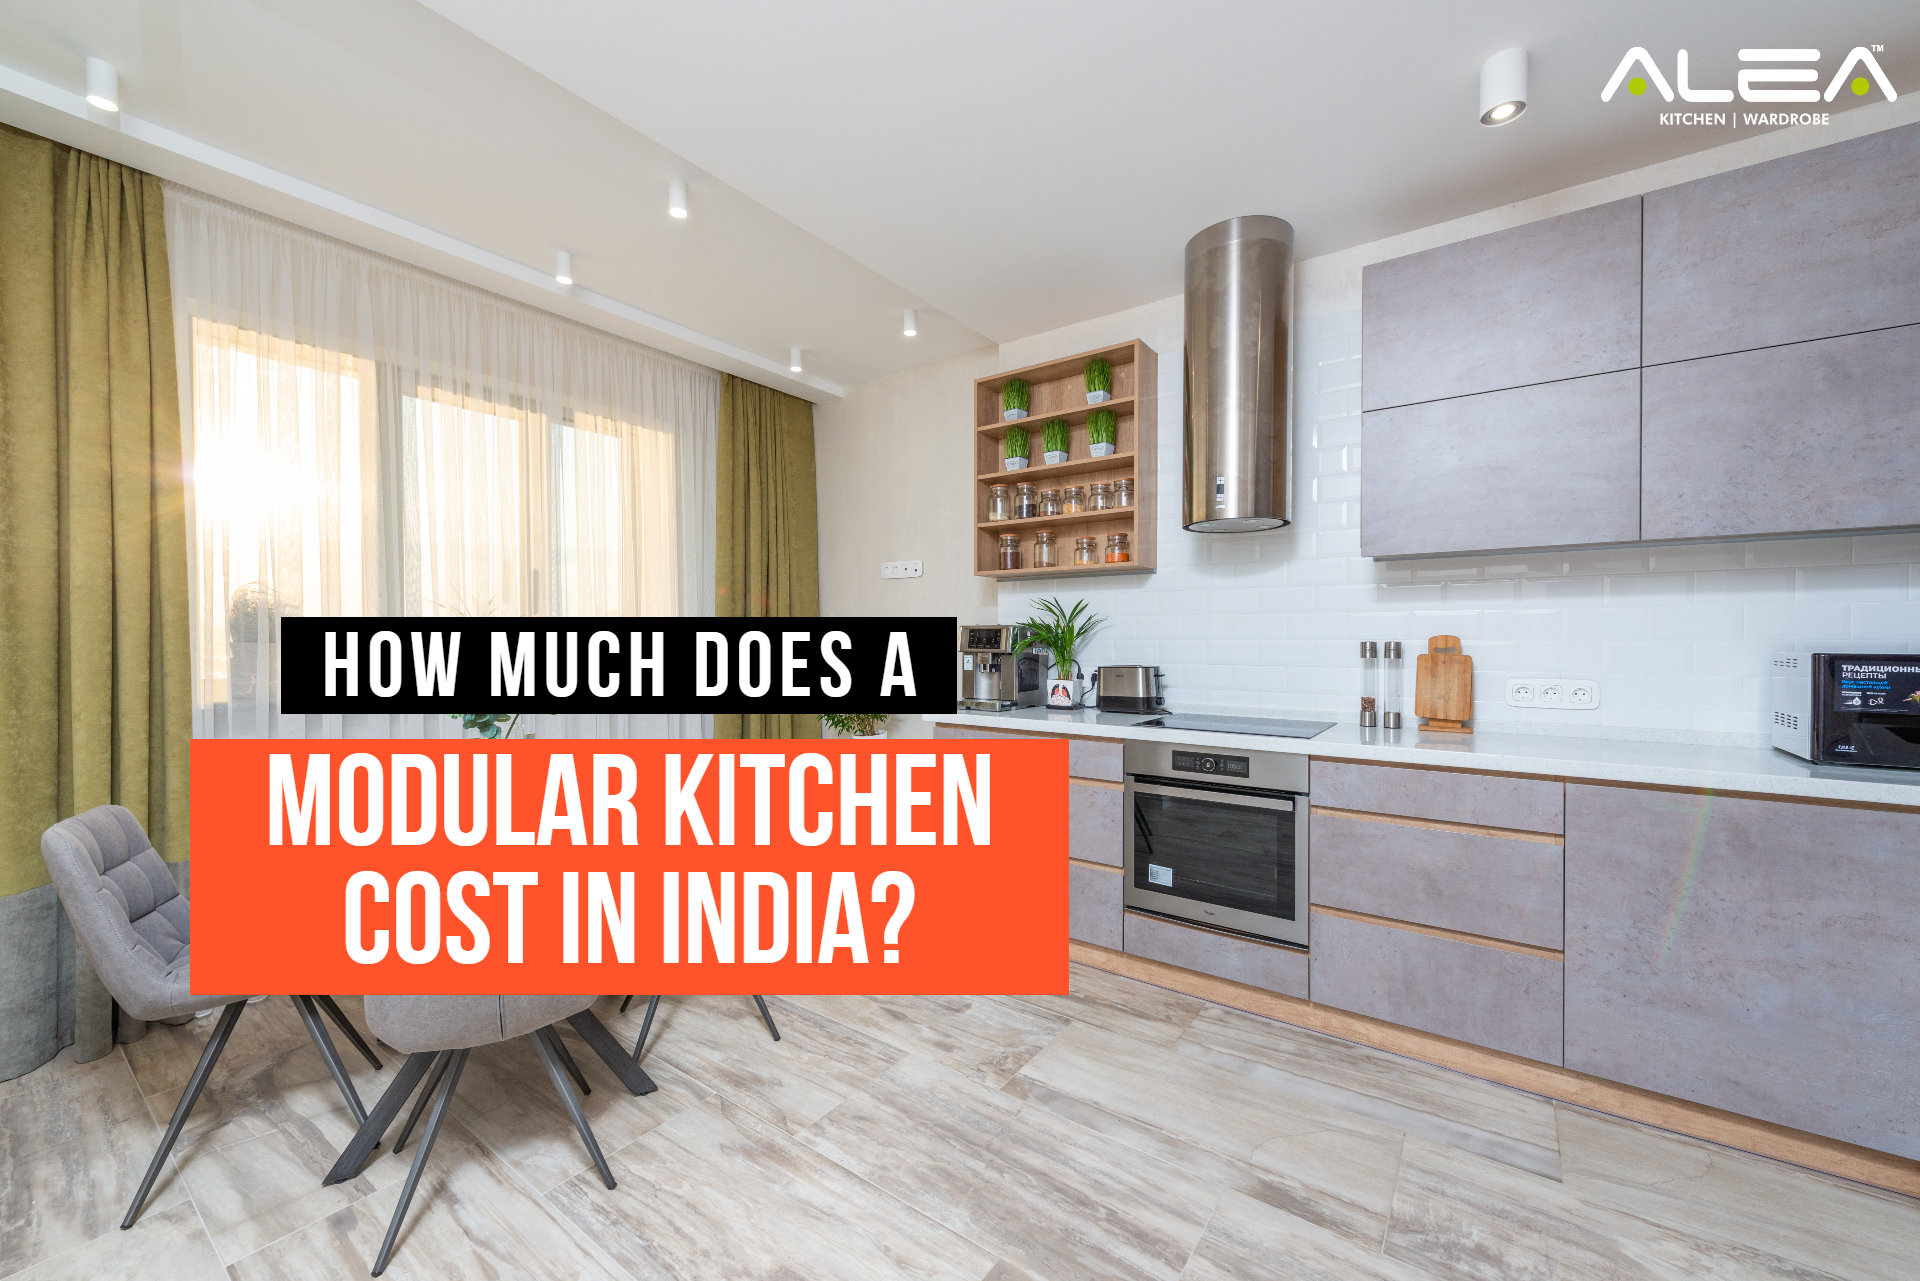 How Much Does A Modular Kitchen Cost In India